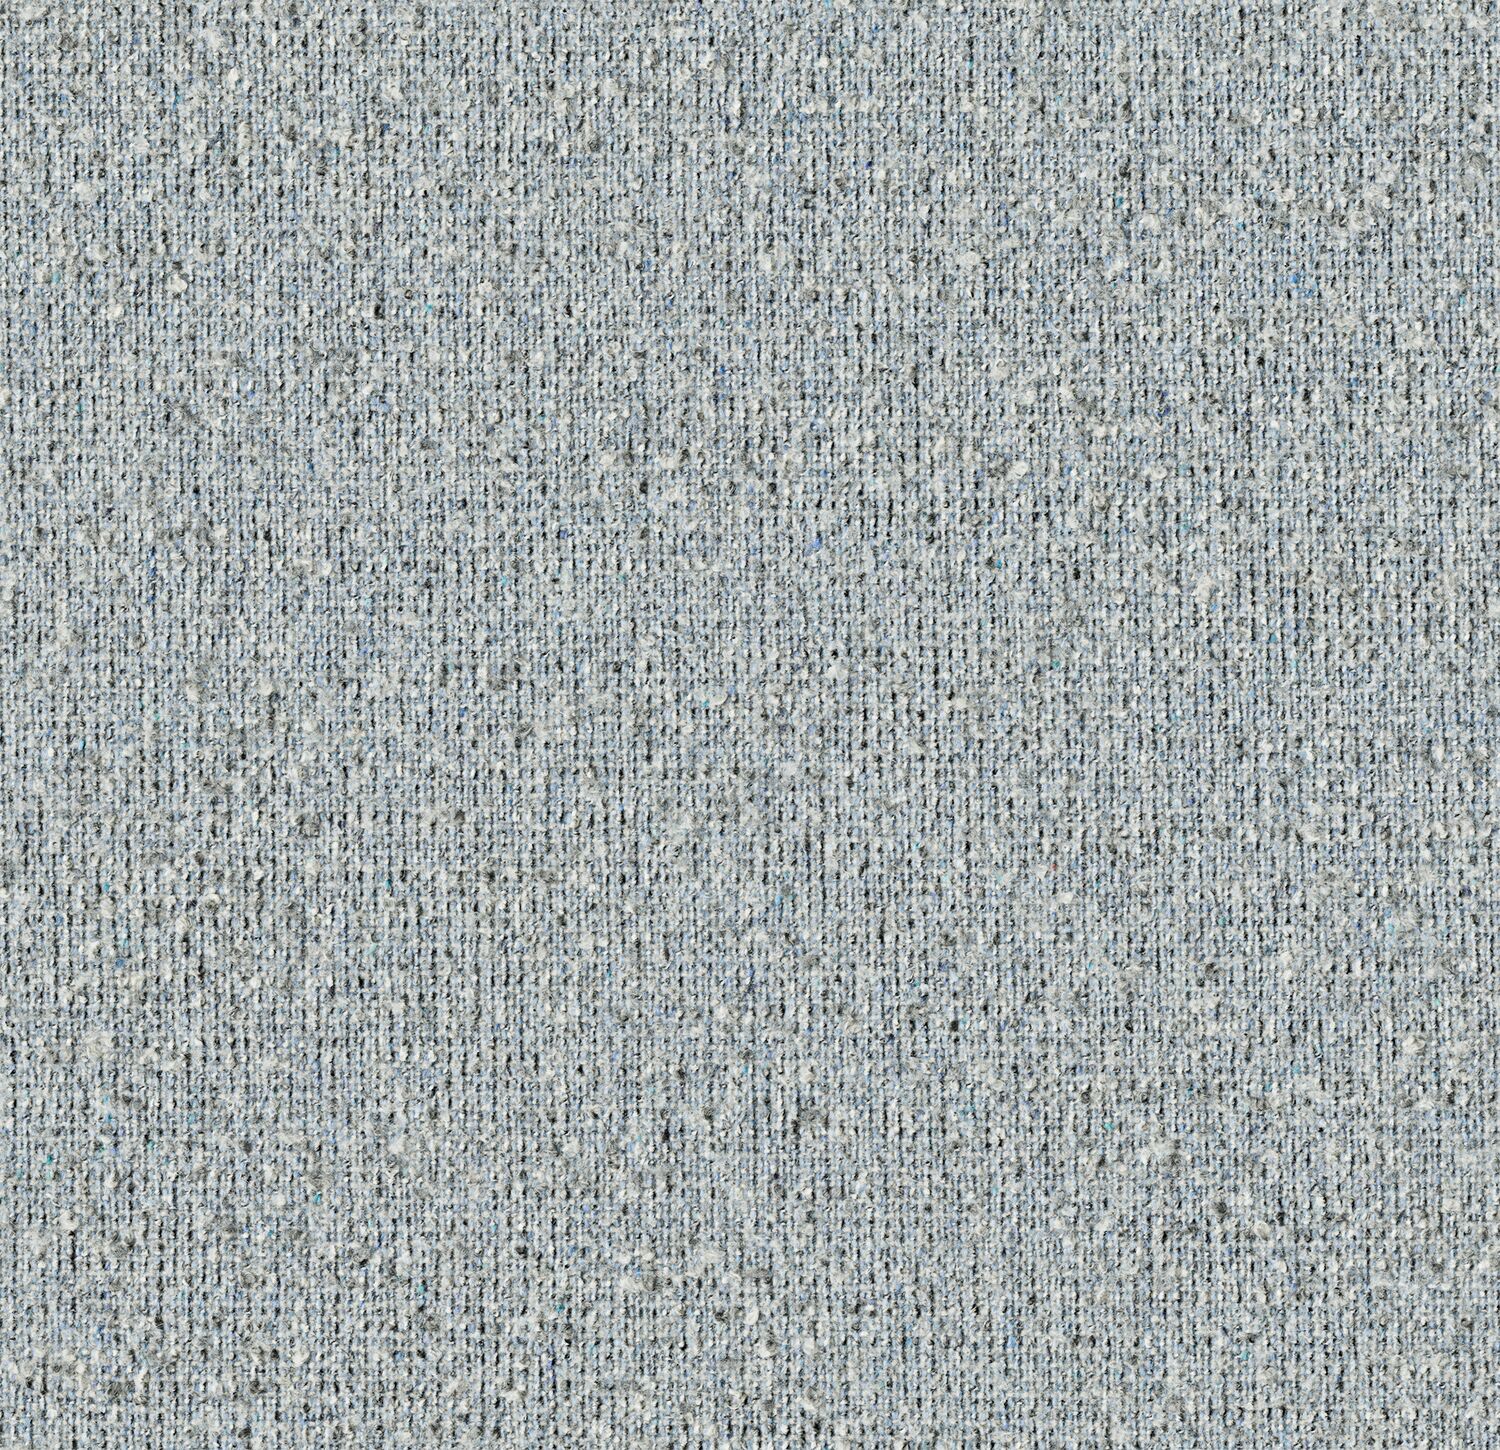 Everyday Boucle - Larkspur - 4111 - 16 - Half Yard Tileable Swatches